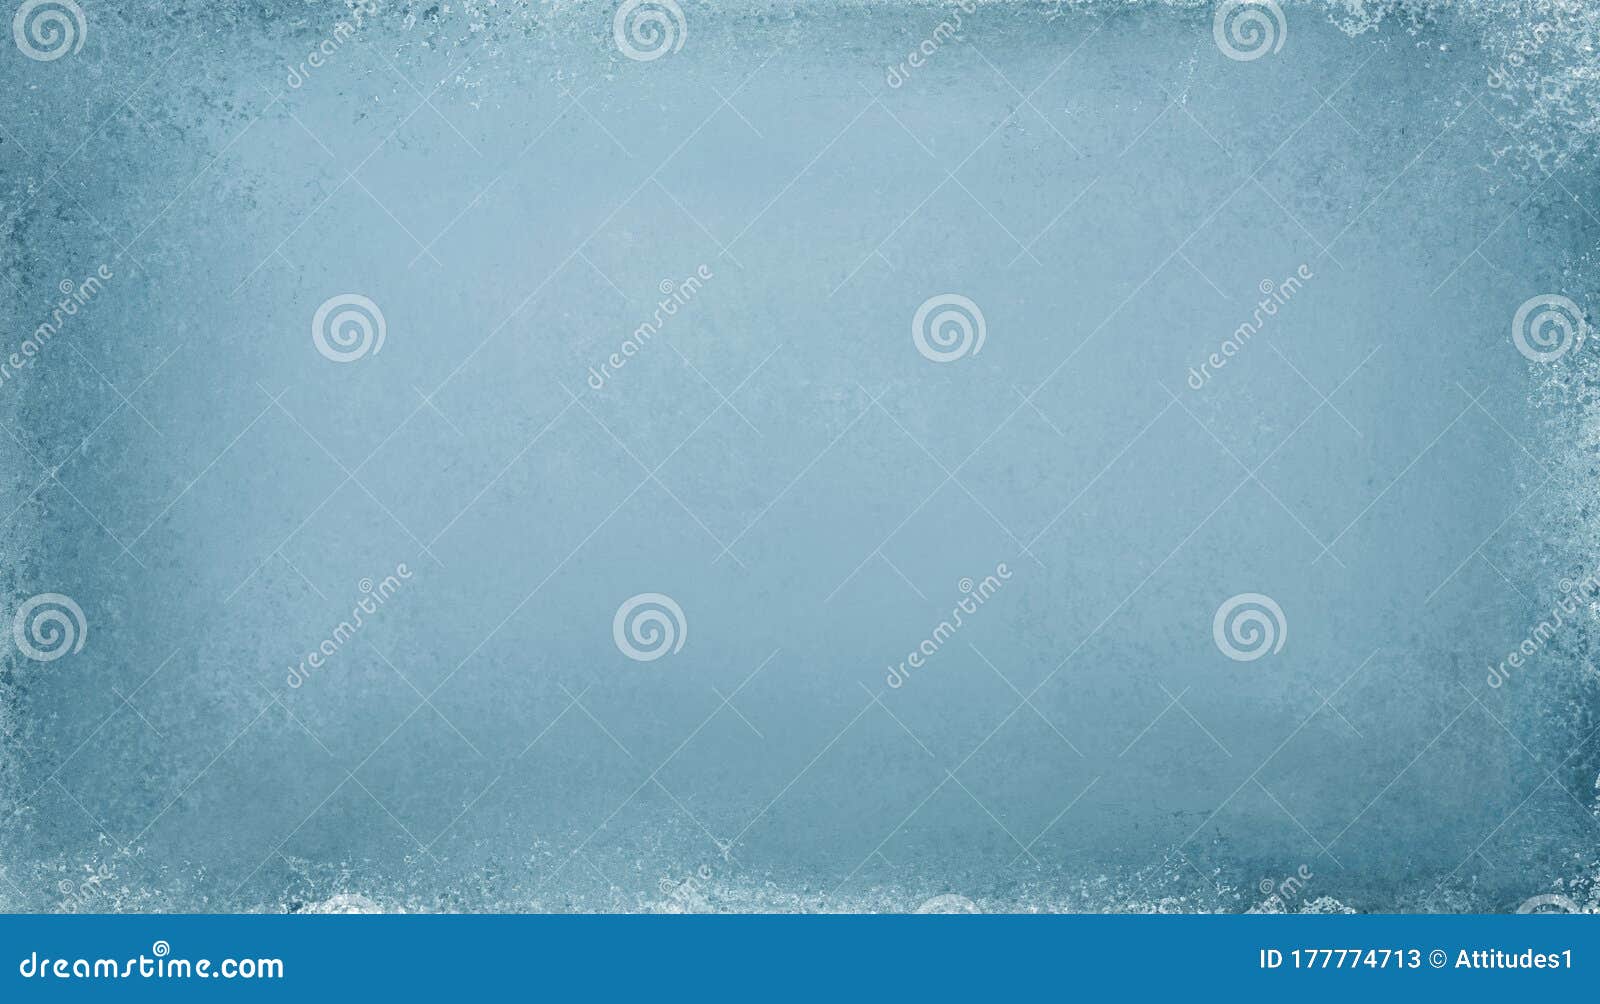 Old light blue paper background illustration with soft blurred texture on  borders in pastel pale blue green color with blank white center, plain  simple elegant vintage background Stock Illustration